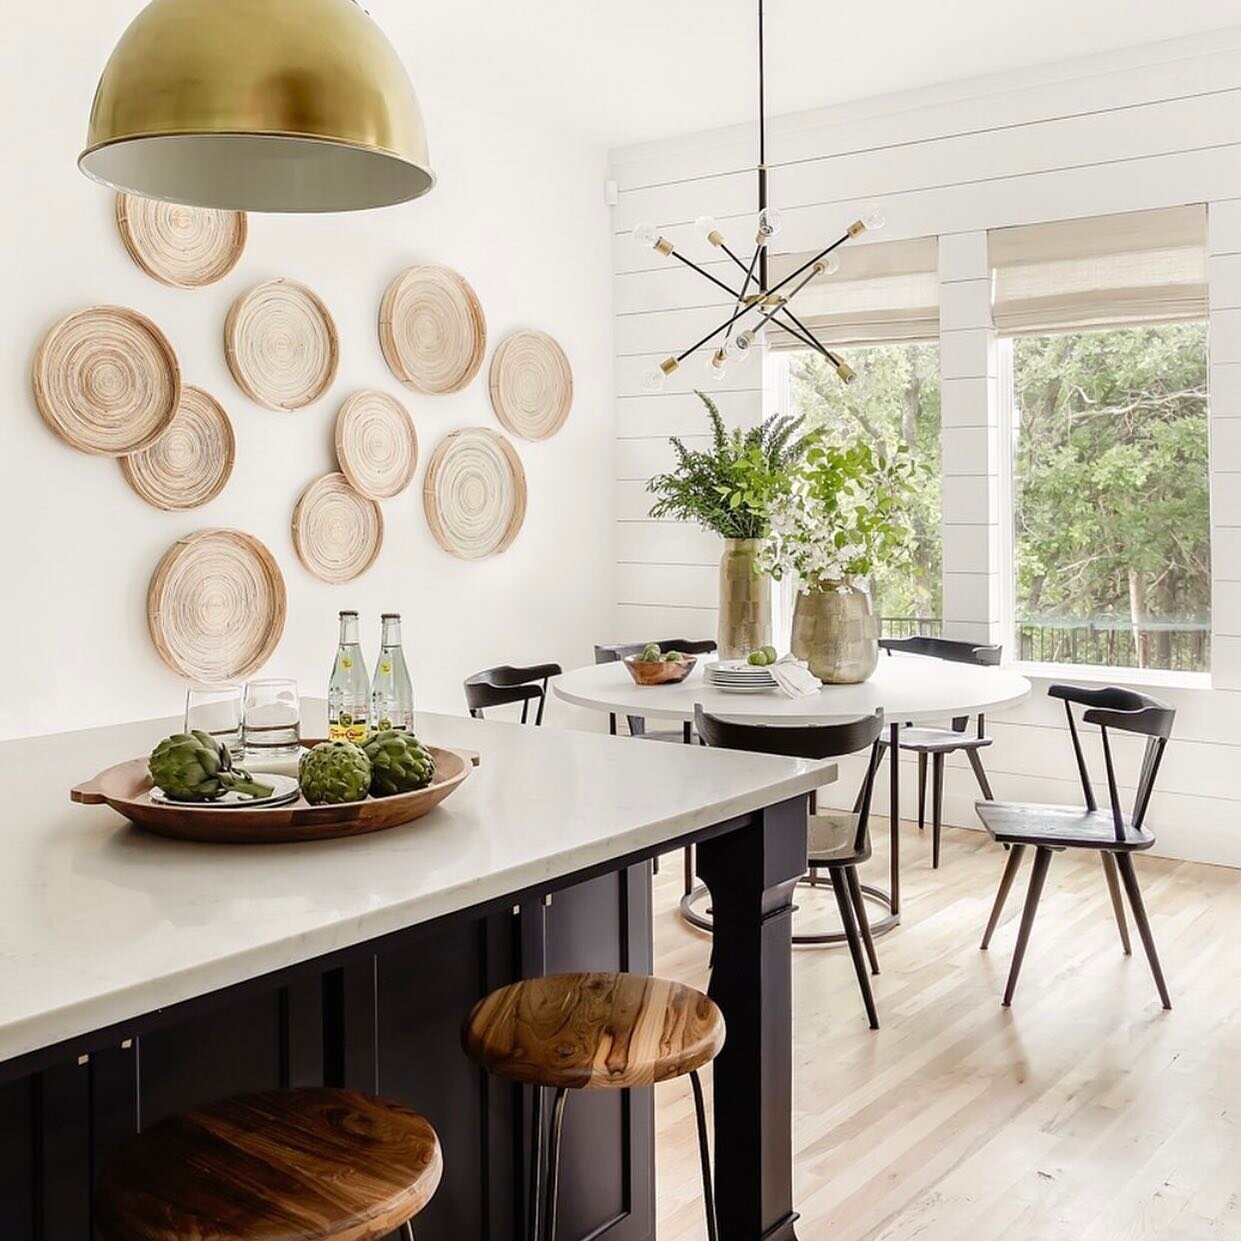 Feng Shui your Dining Room ✨

The dining room is a primary space in your home where people gather to share conversation, food, and time. Incorporating a round dining table encourages this connection and conversation.

A round dining table provides a 